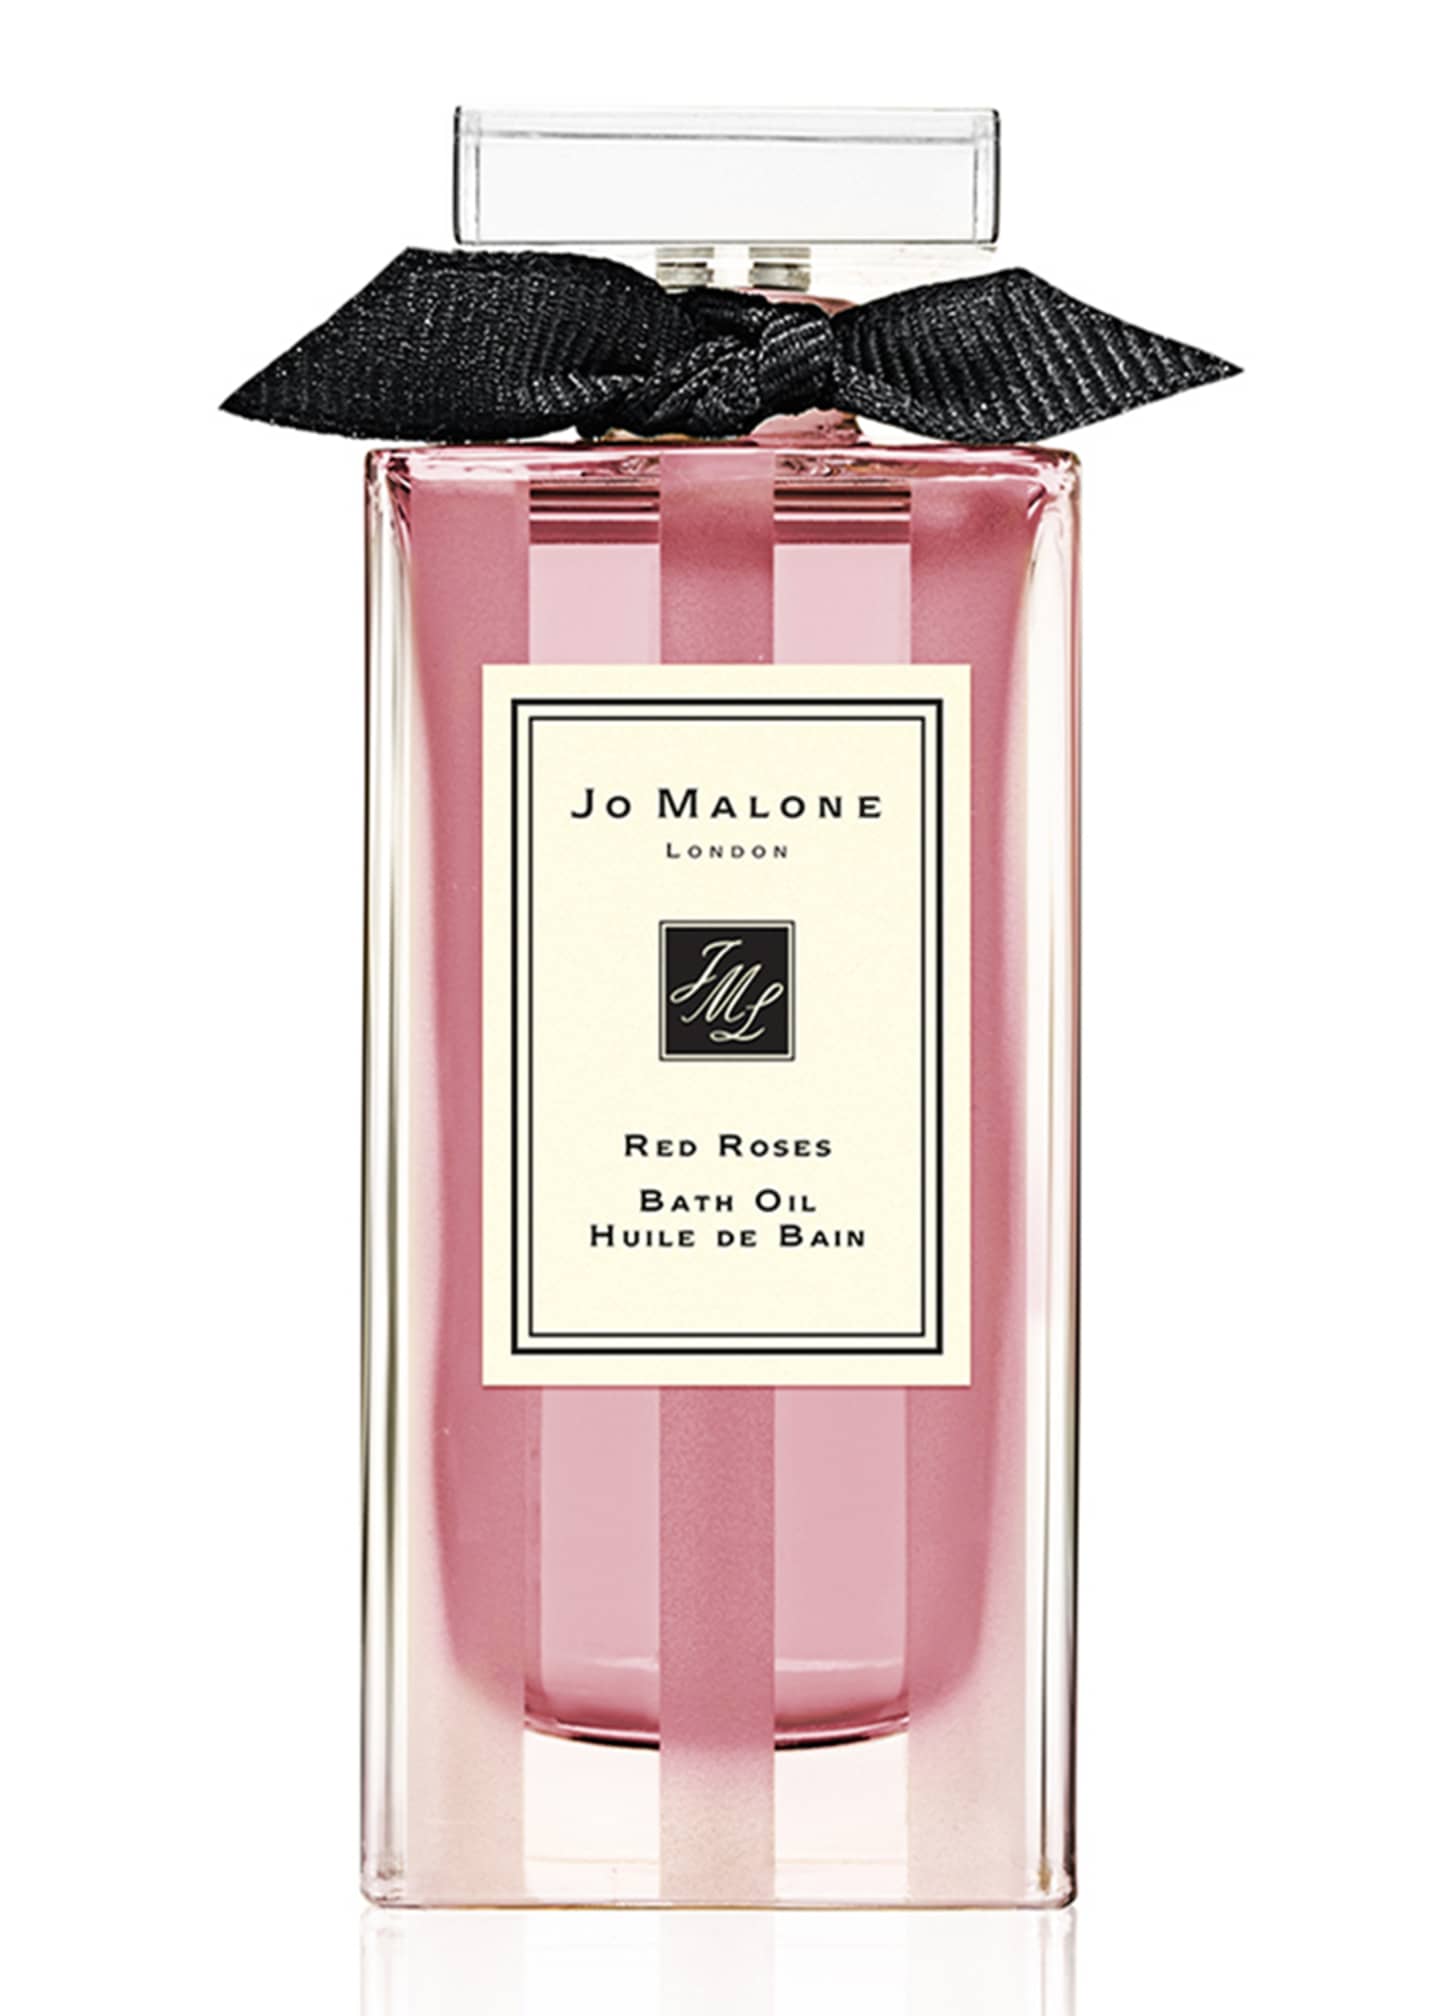 Jo Malone London Red Roses Bath Oil, 30 mL Image 2 of 2